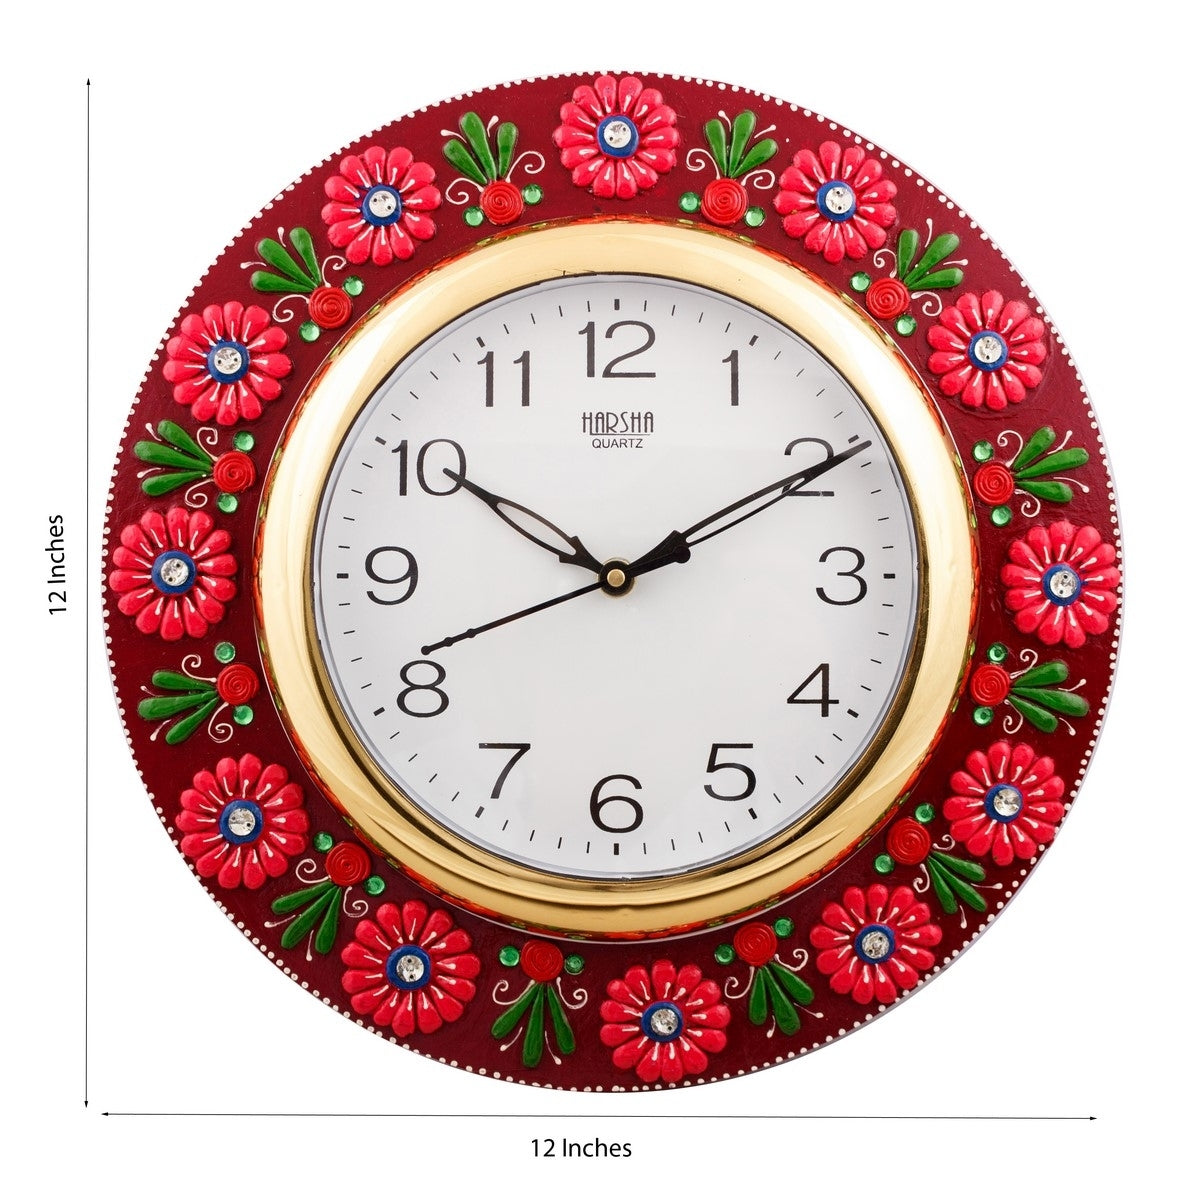 Vibrant Red Floral Crafted Papier-Mache Wooden Handcrafted Wall Clock 2